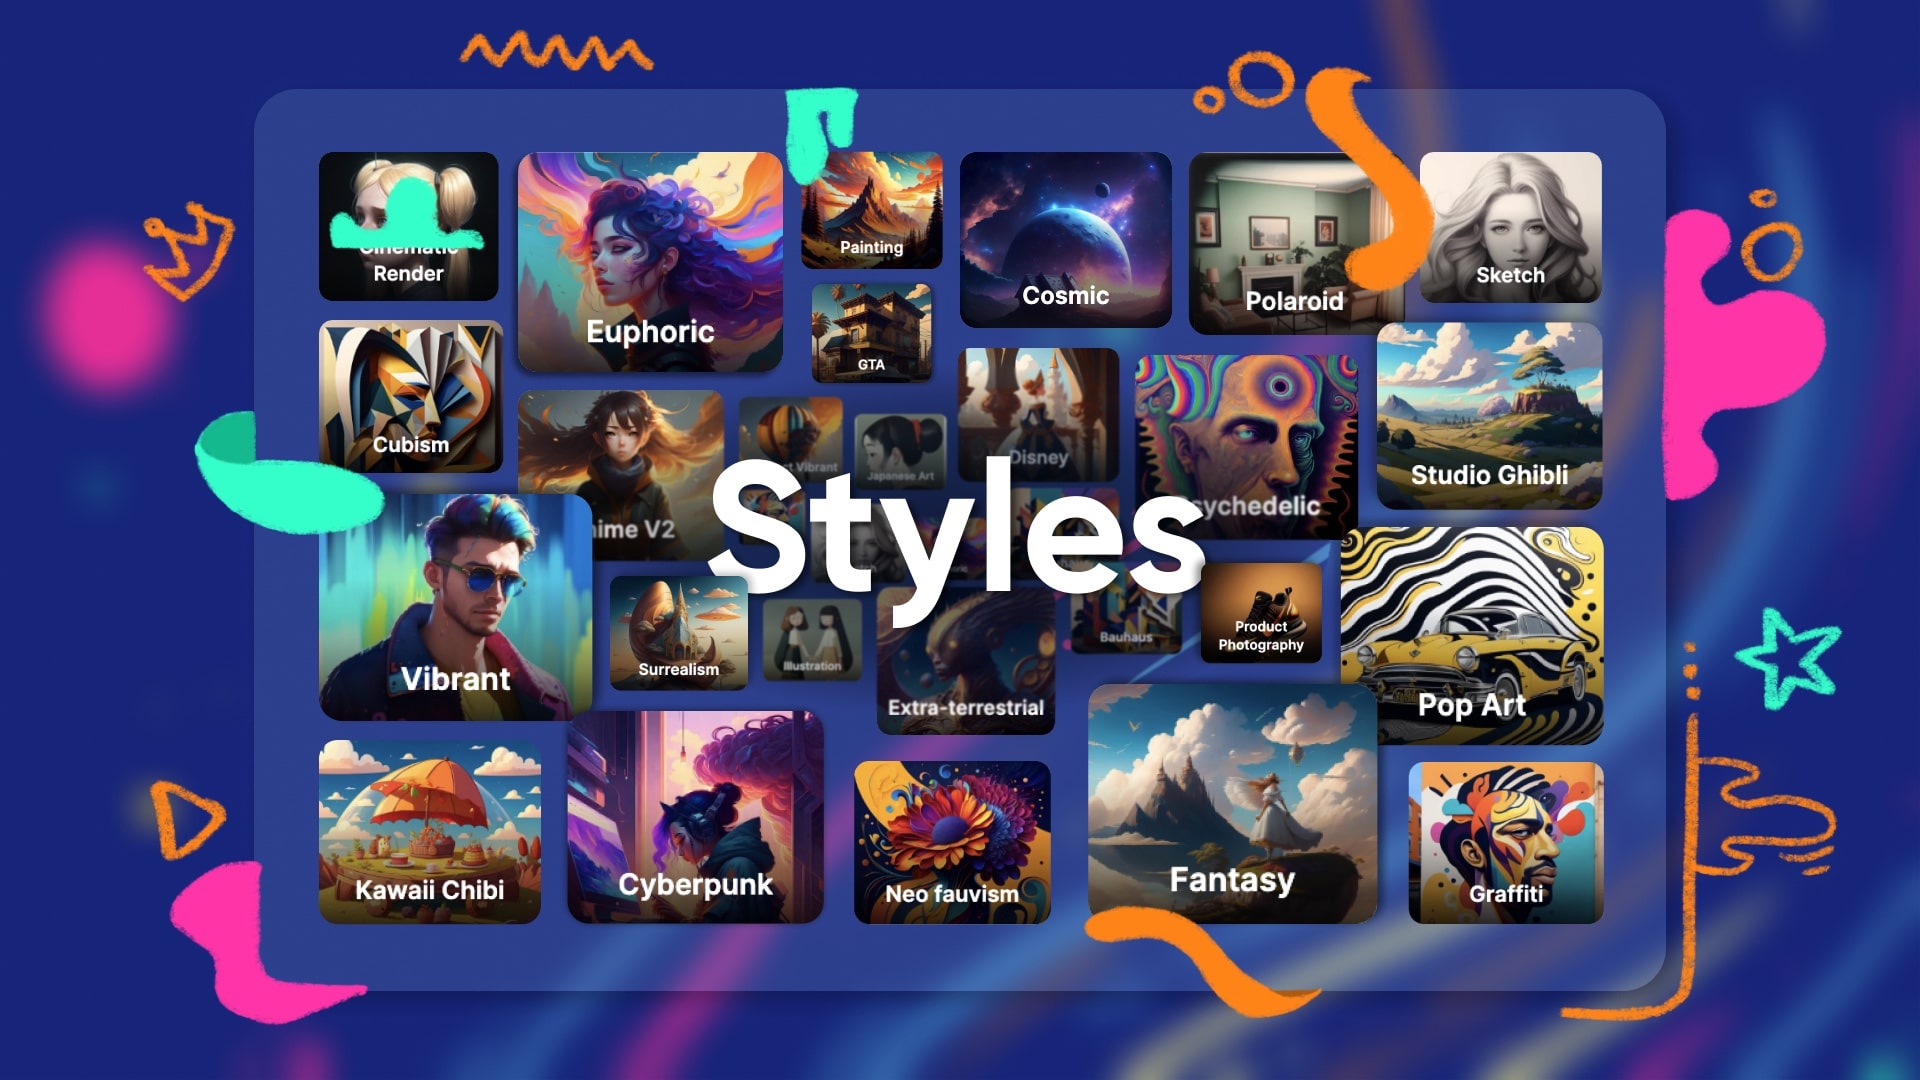 grid displaying thumbnails of various art styles